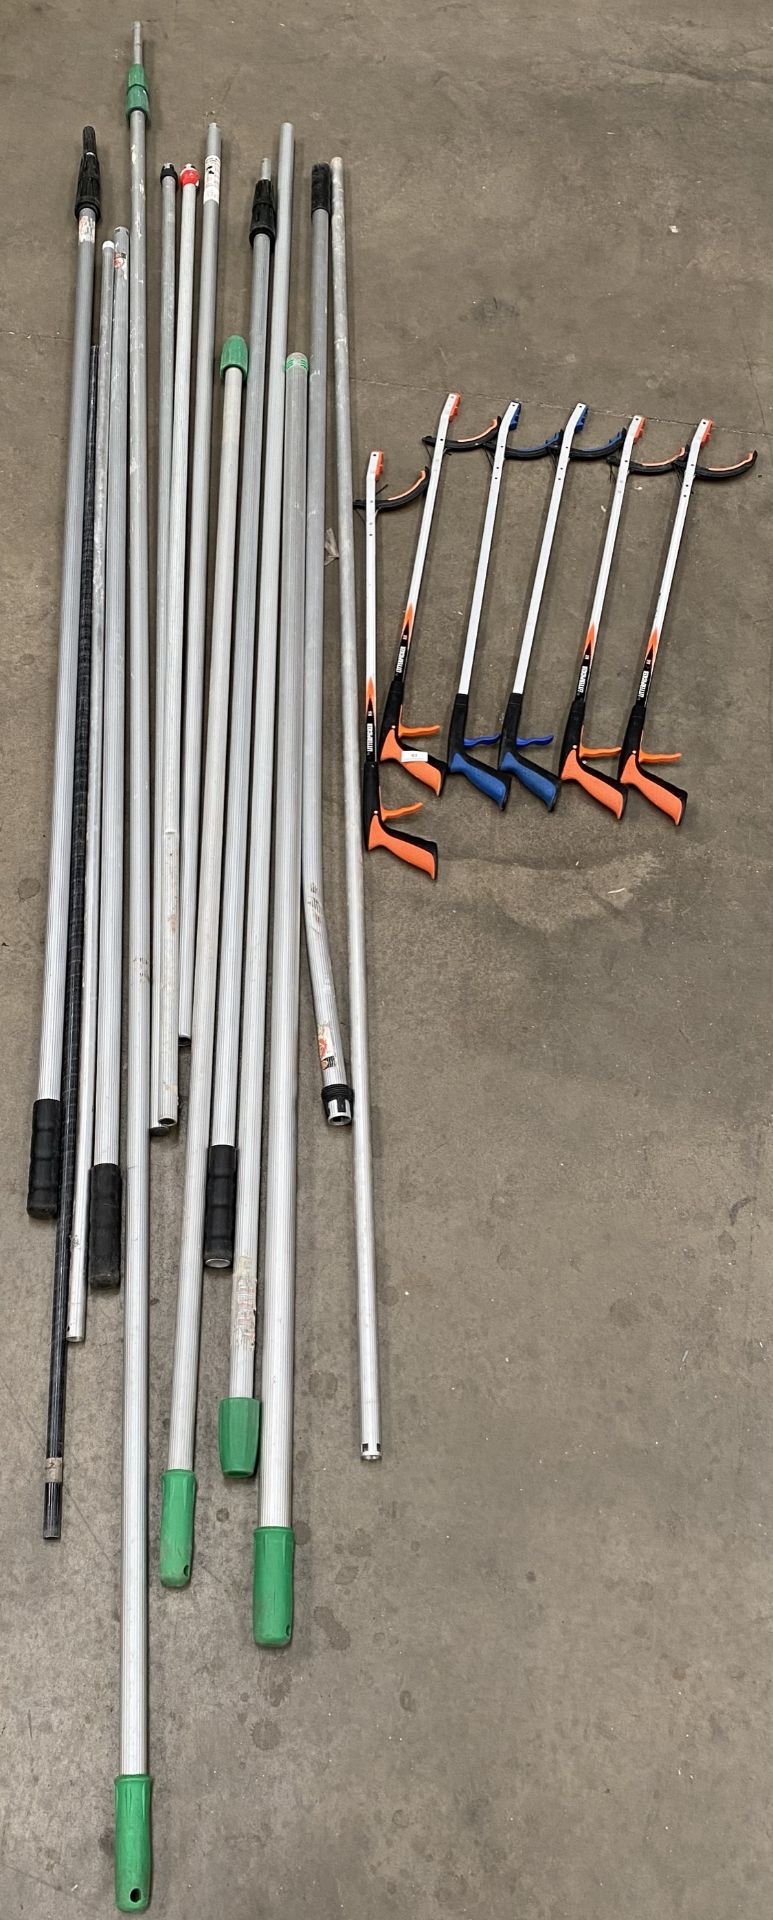 6 x litter pickers and a large qty of aluminium fixed and extending extension lances